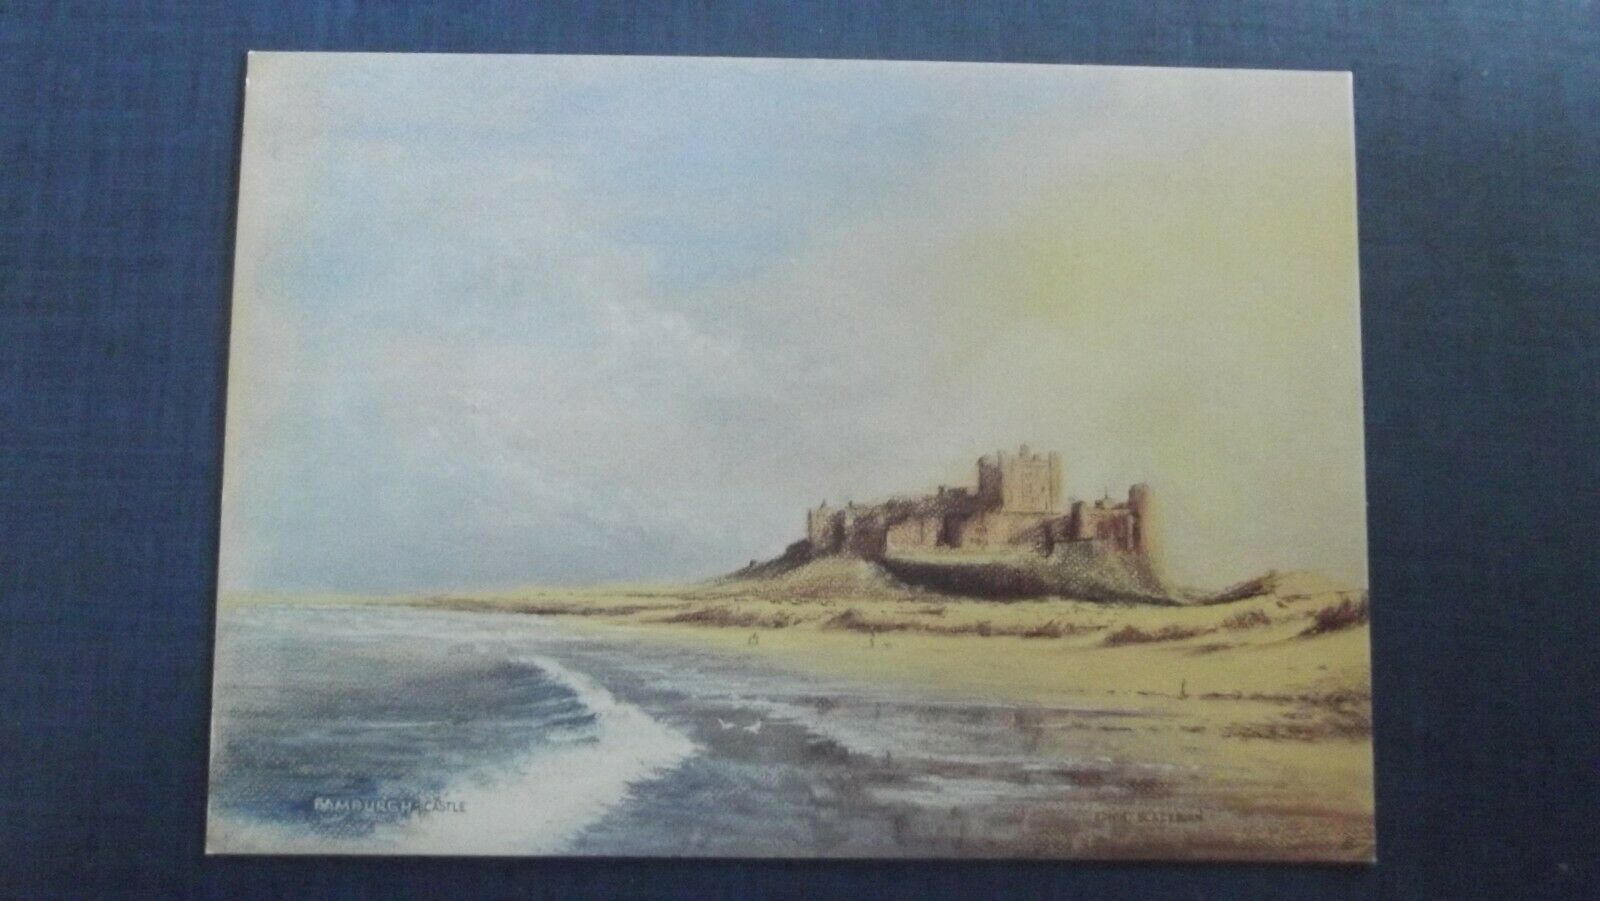 Bamburgh Castle From The North Edwin Blackburn Collection c 1980 Unposted